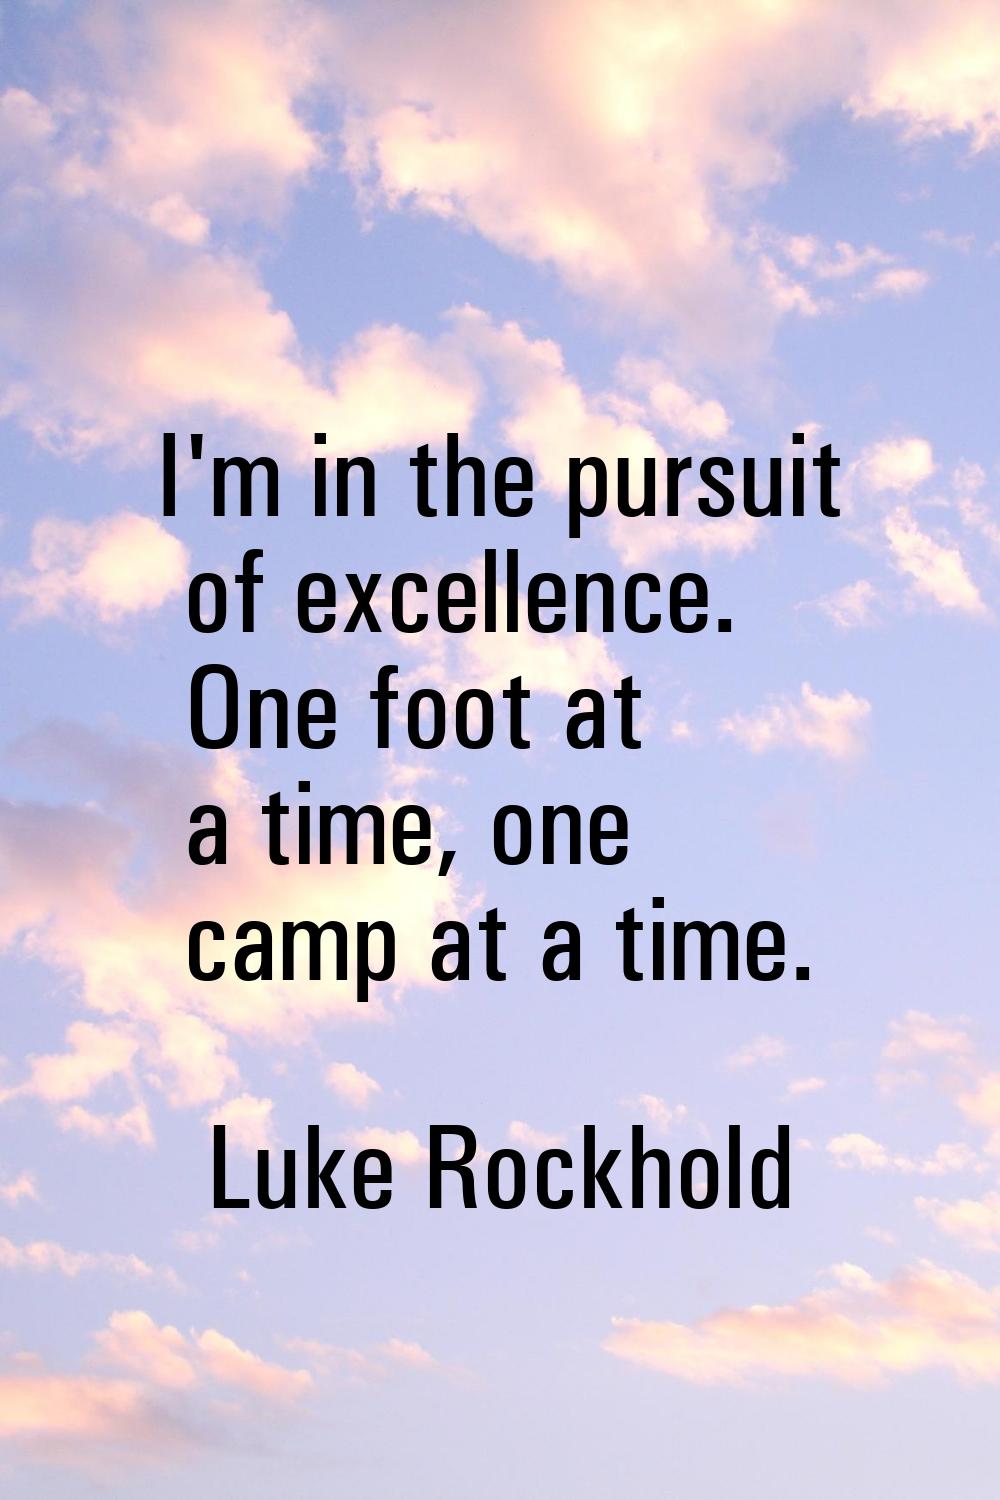 I'm in the pursuit of excellence. One foot at a time, one camp at a time.